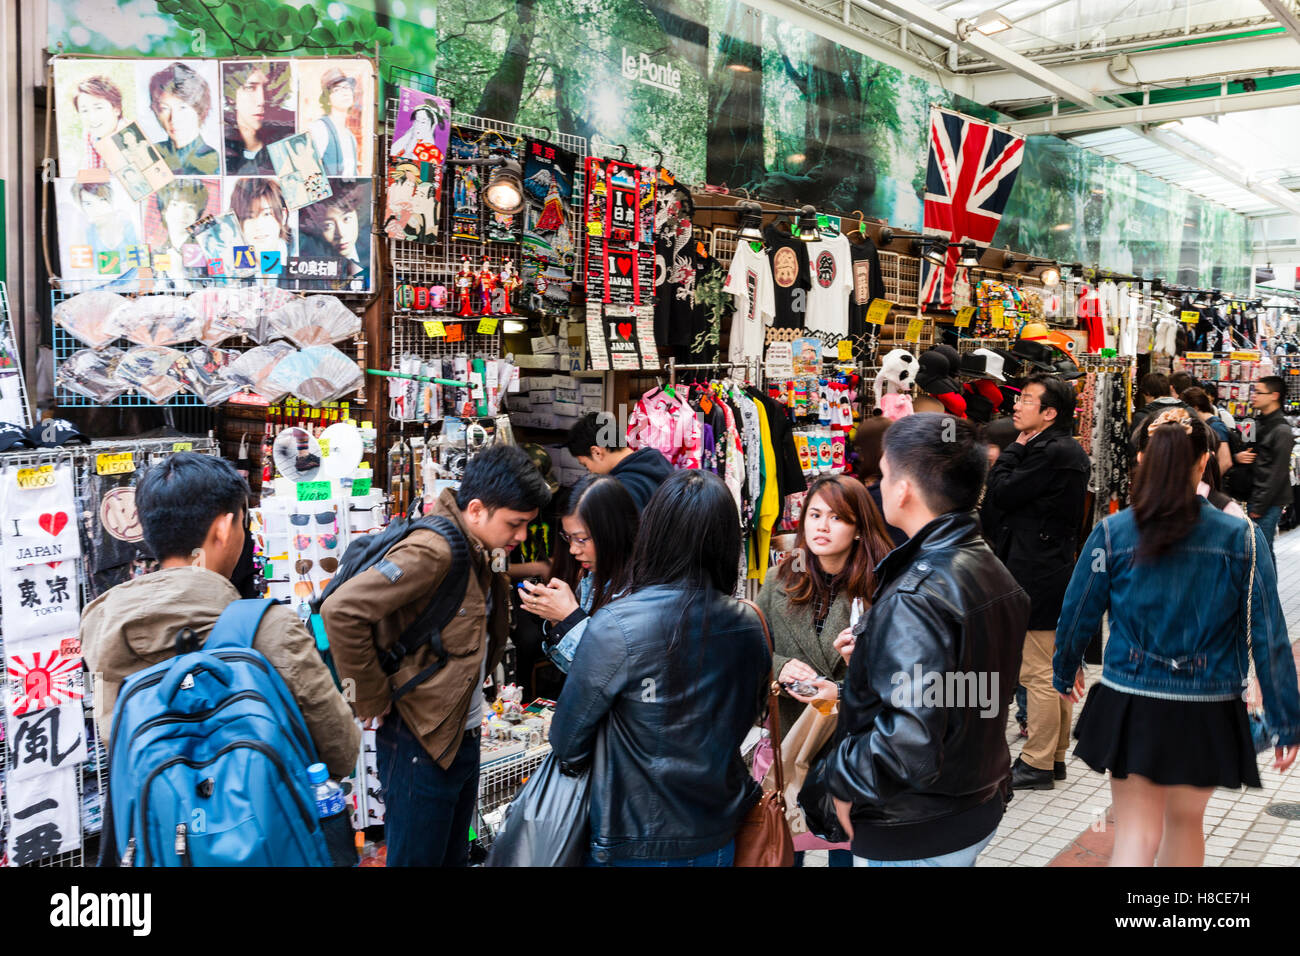 Japan, Tokyo, Harajuku, Takeshita dori. Street view, group of teenagers outside shop with outside display stands selling accessories, Union Jack hangs. Stock Photo